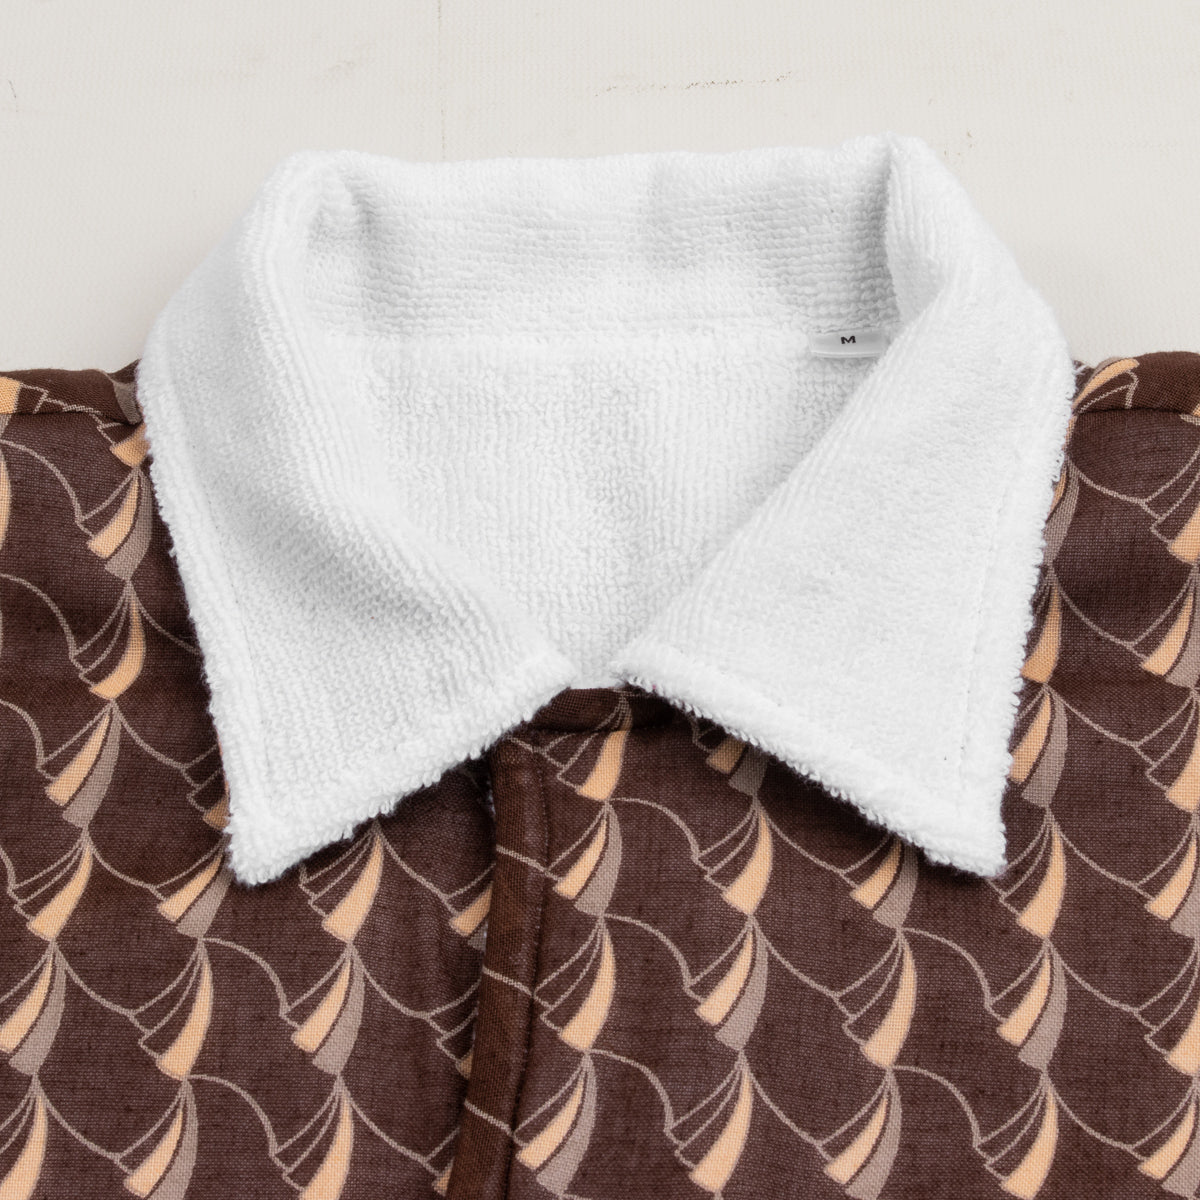 Bryceland's Co Towel Shirt - Brunette Brown Extra Large